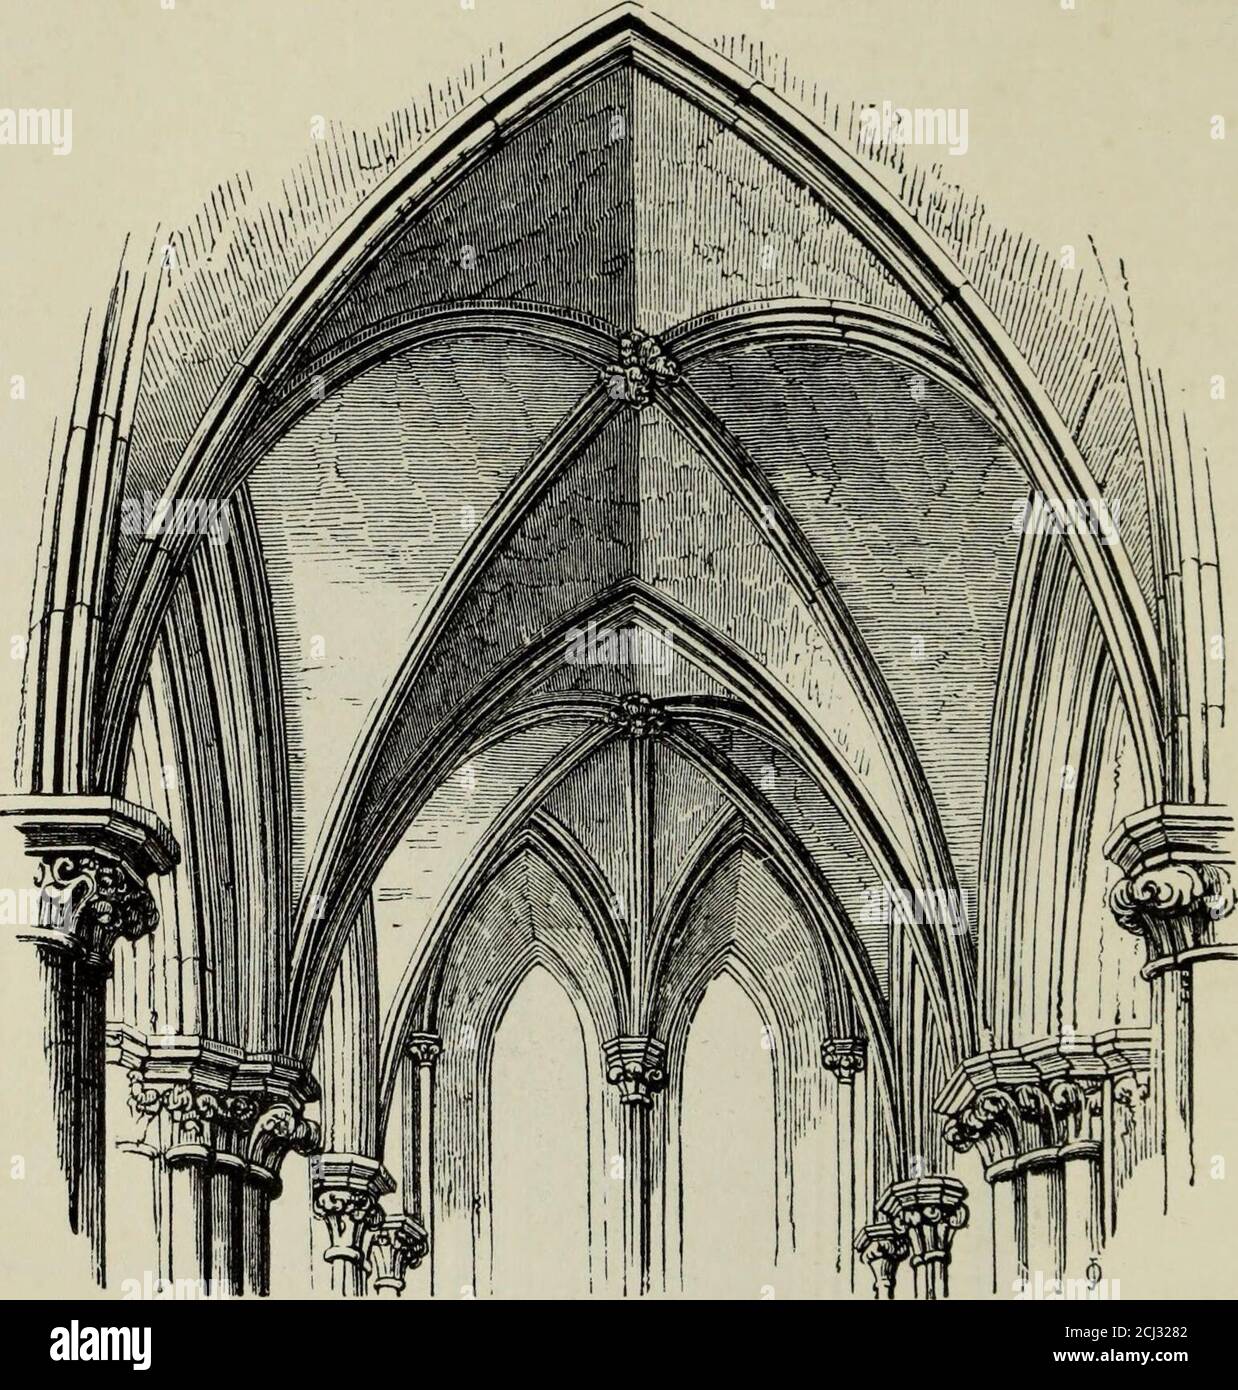 G rib vaulting flying buttresses pointed arches  European art Gothic  art Art history